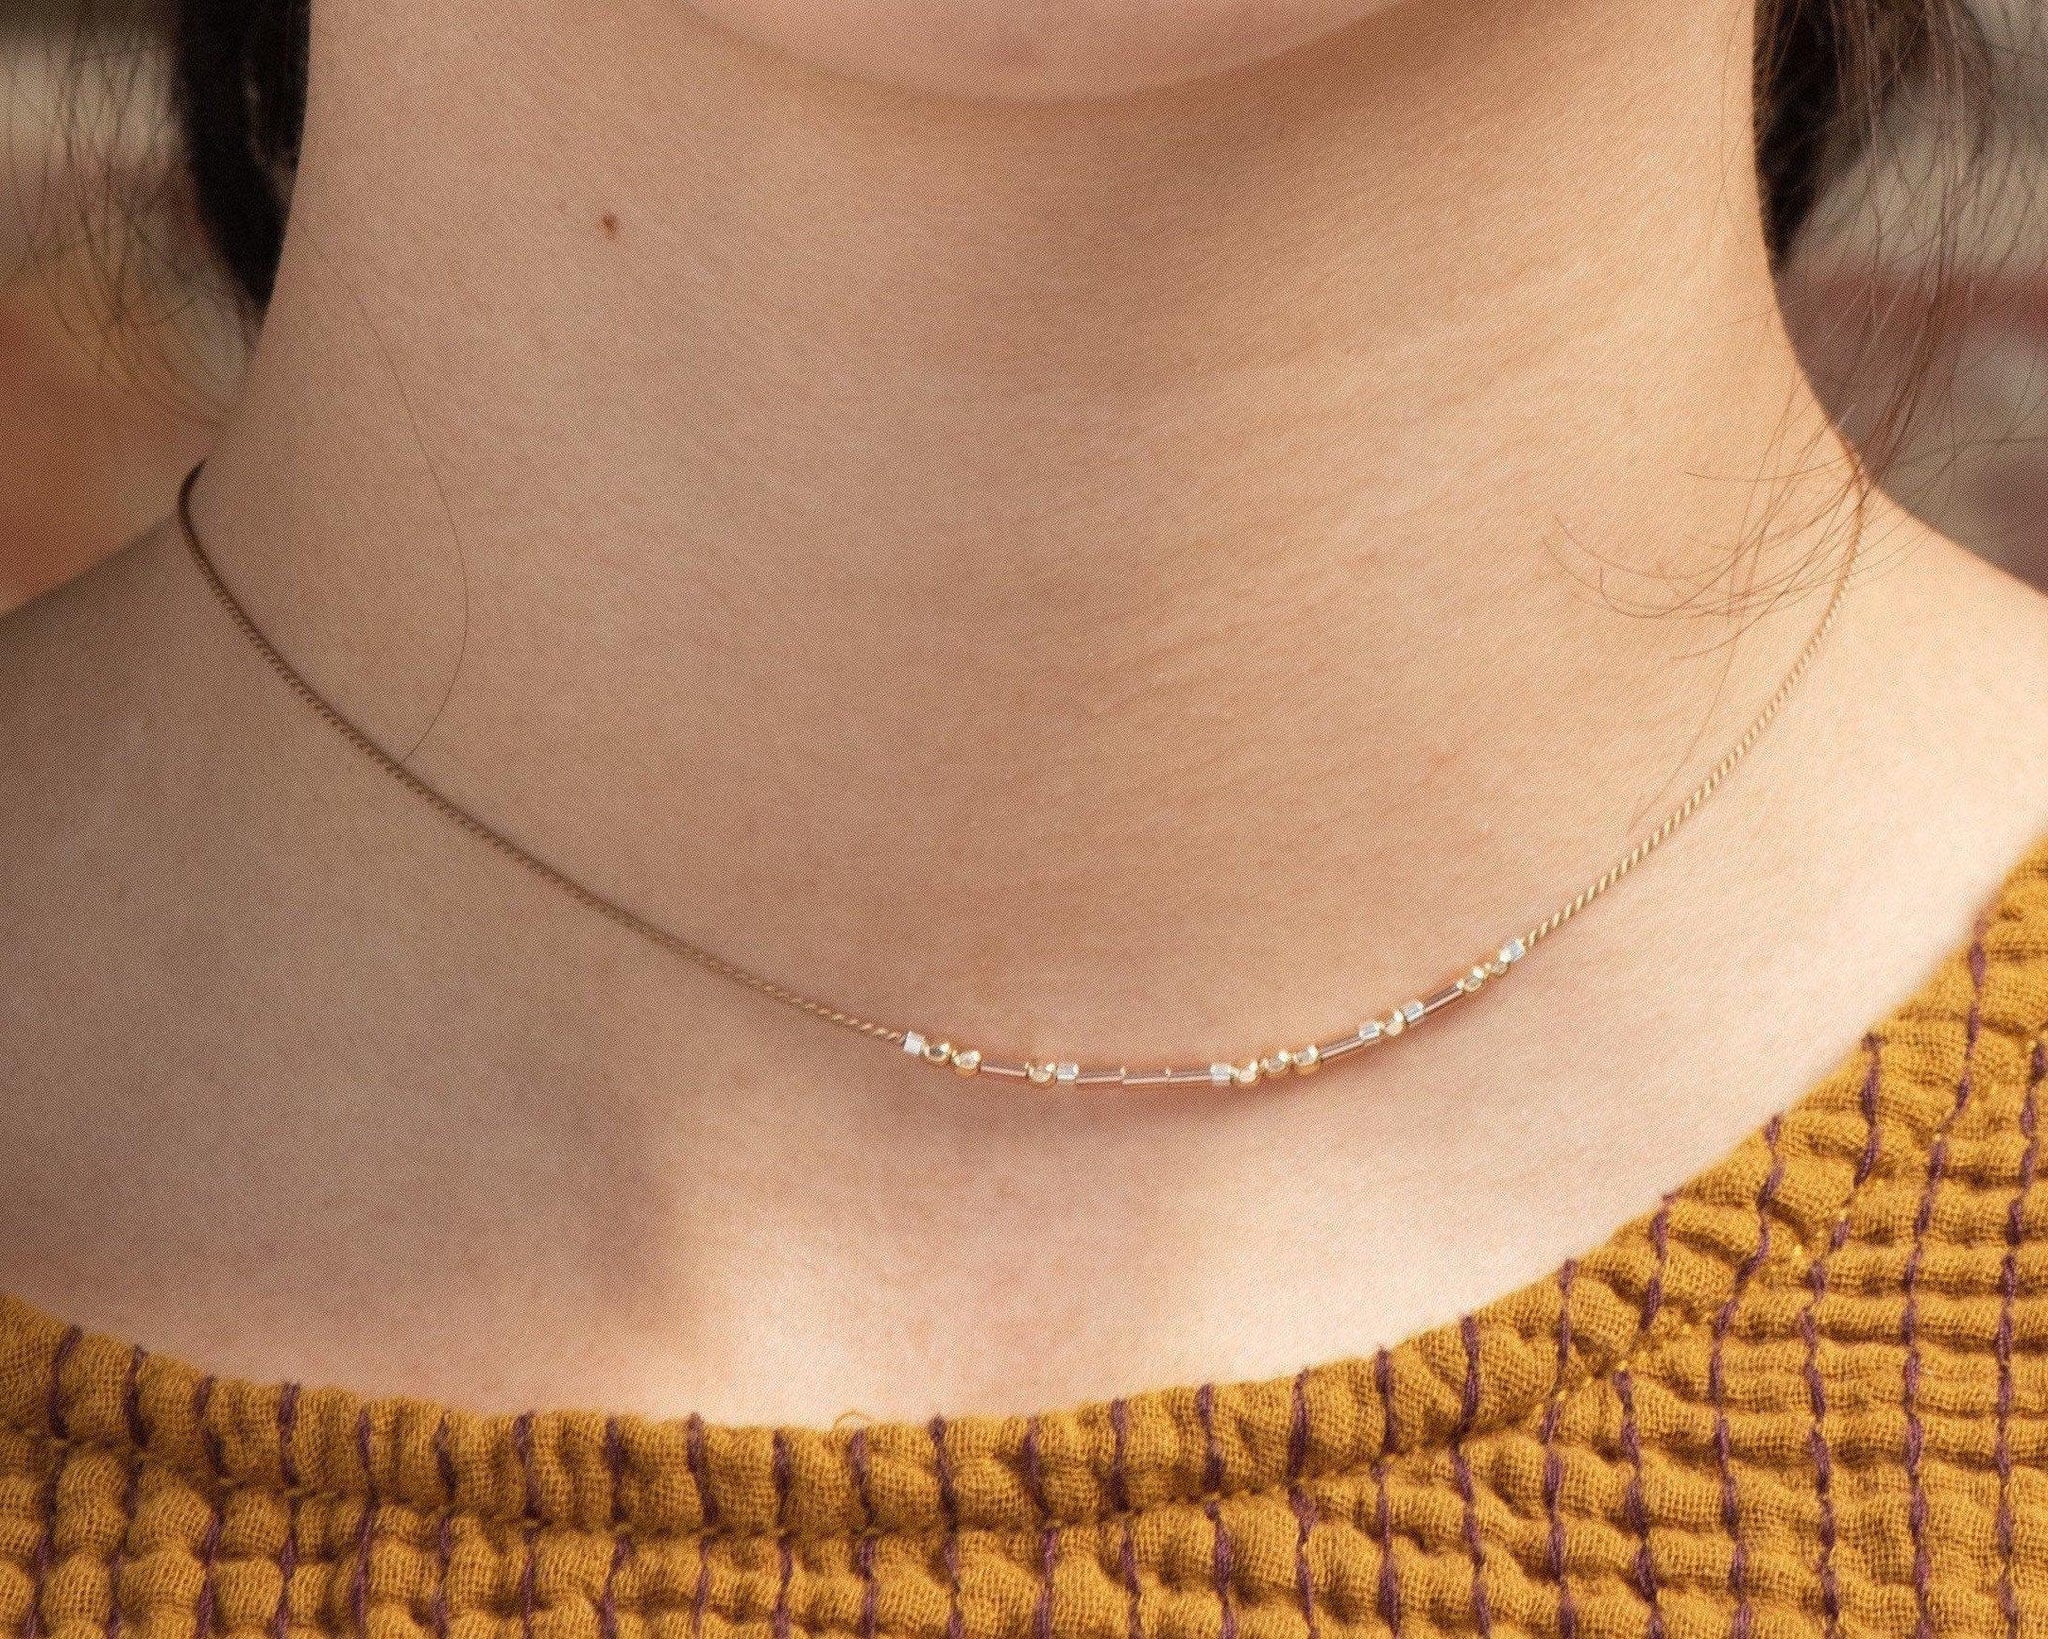 Dainty Morse Code Necklace • AX.YF.RT.S1 - Morse and Dainty